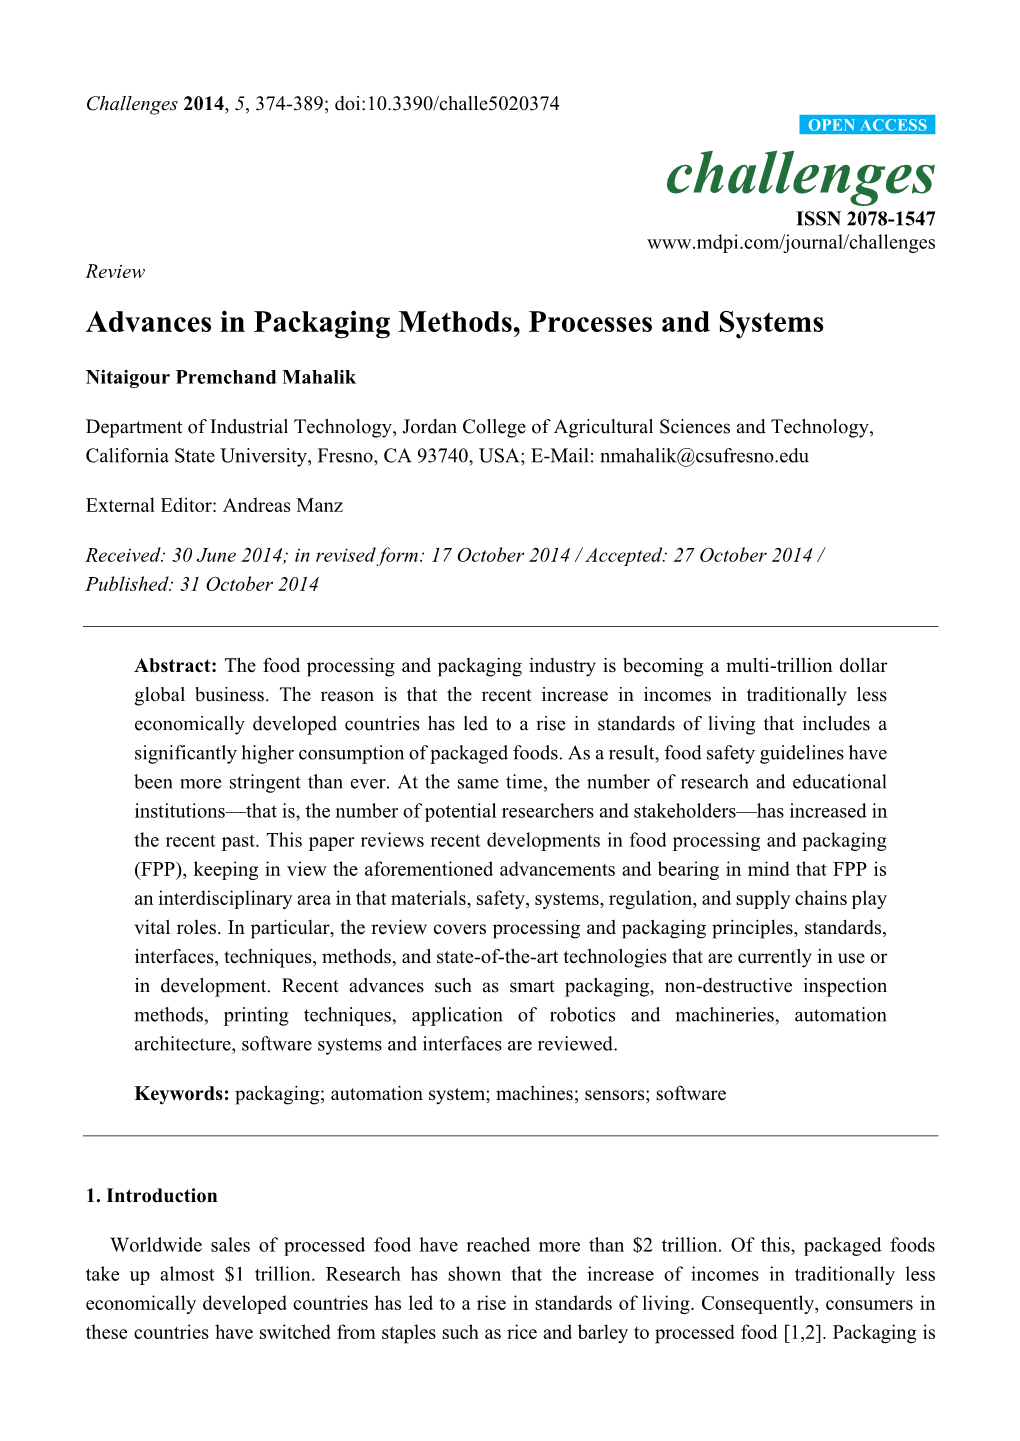 Advances in Packaging Methods, Processes and Systems